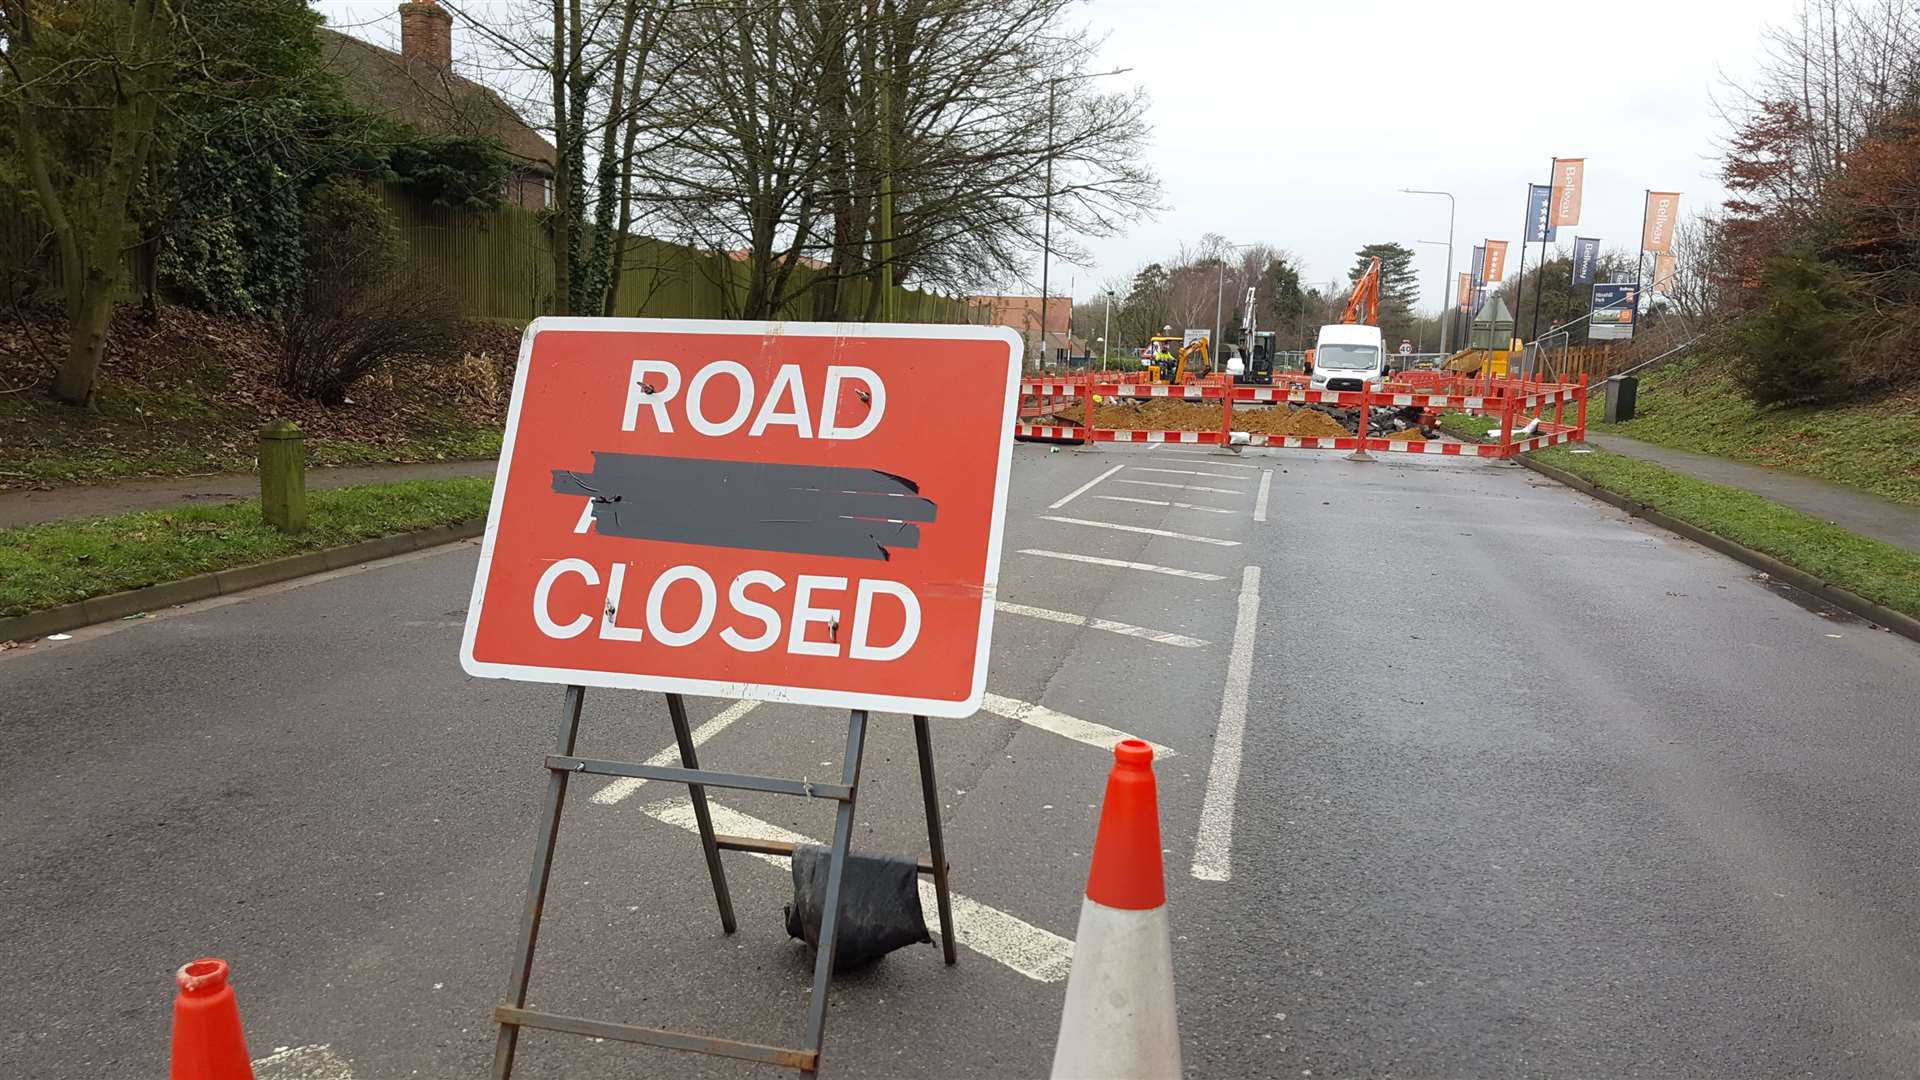 The route was shut earlier this week, and will remain closed until next Sunday